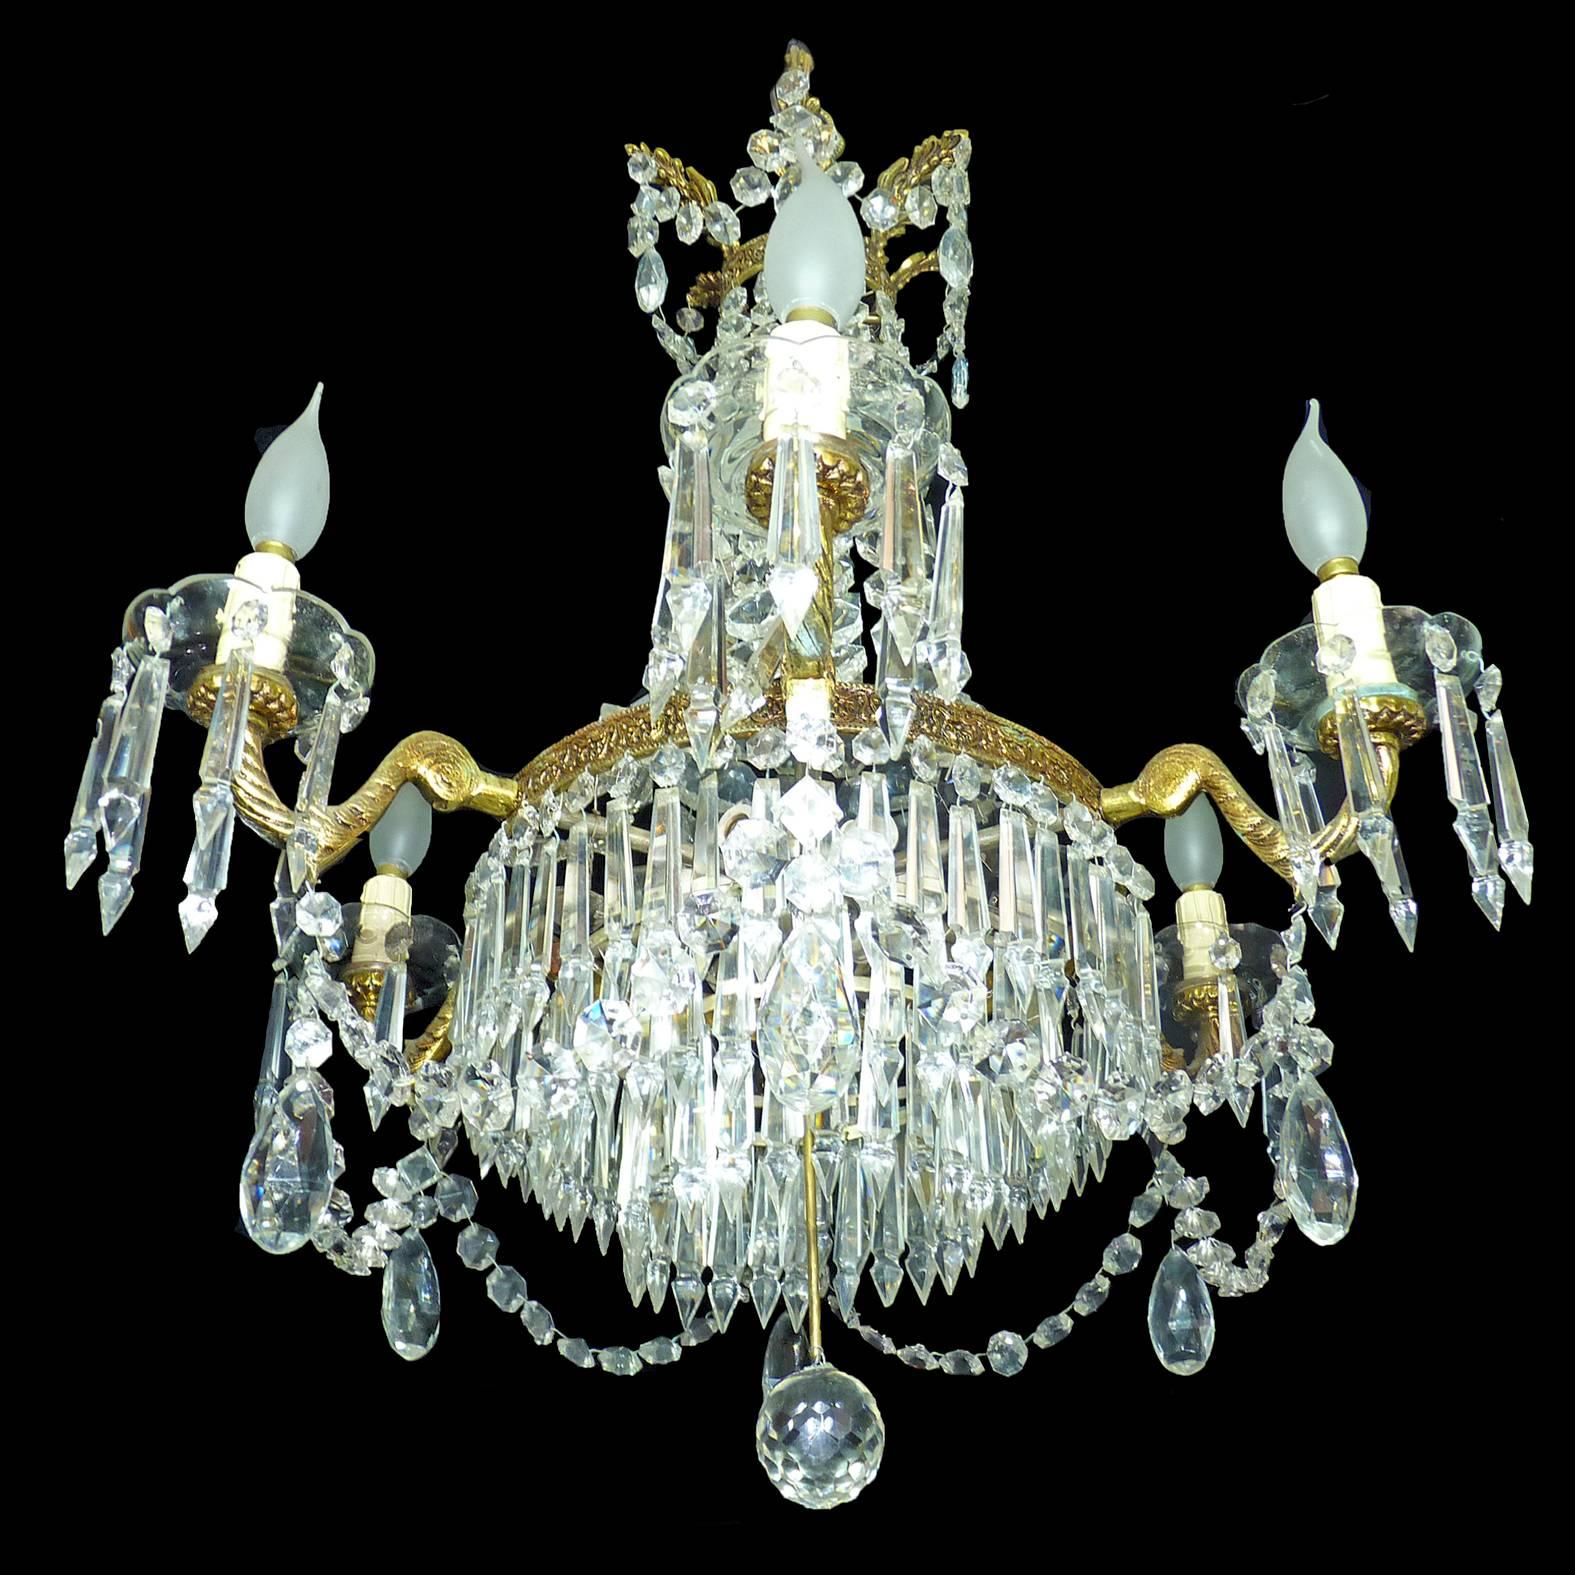 French Empire Regency Crystal and Gilt Bronze 12-Light Wedding Cake Chandelier In Good Condition For Sale In Coimbra, PT